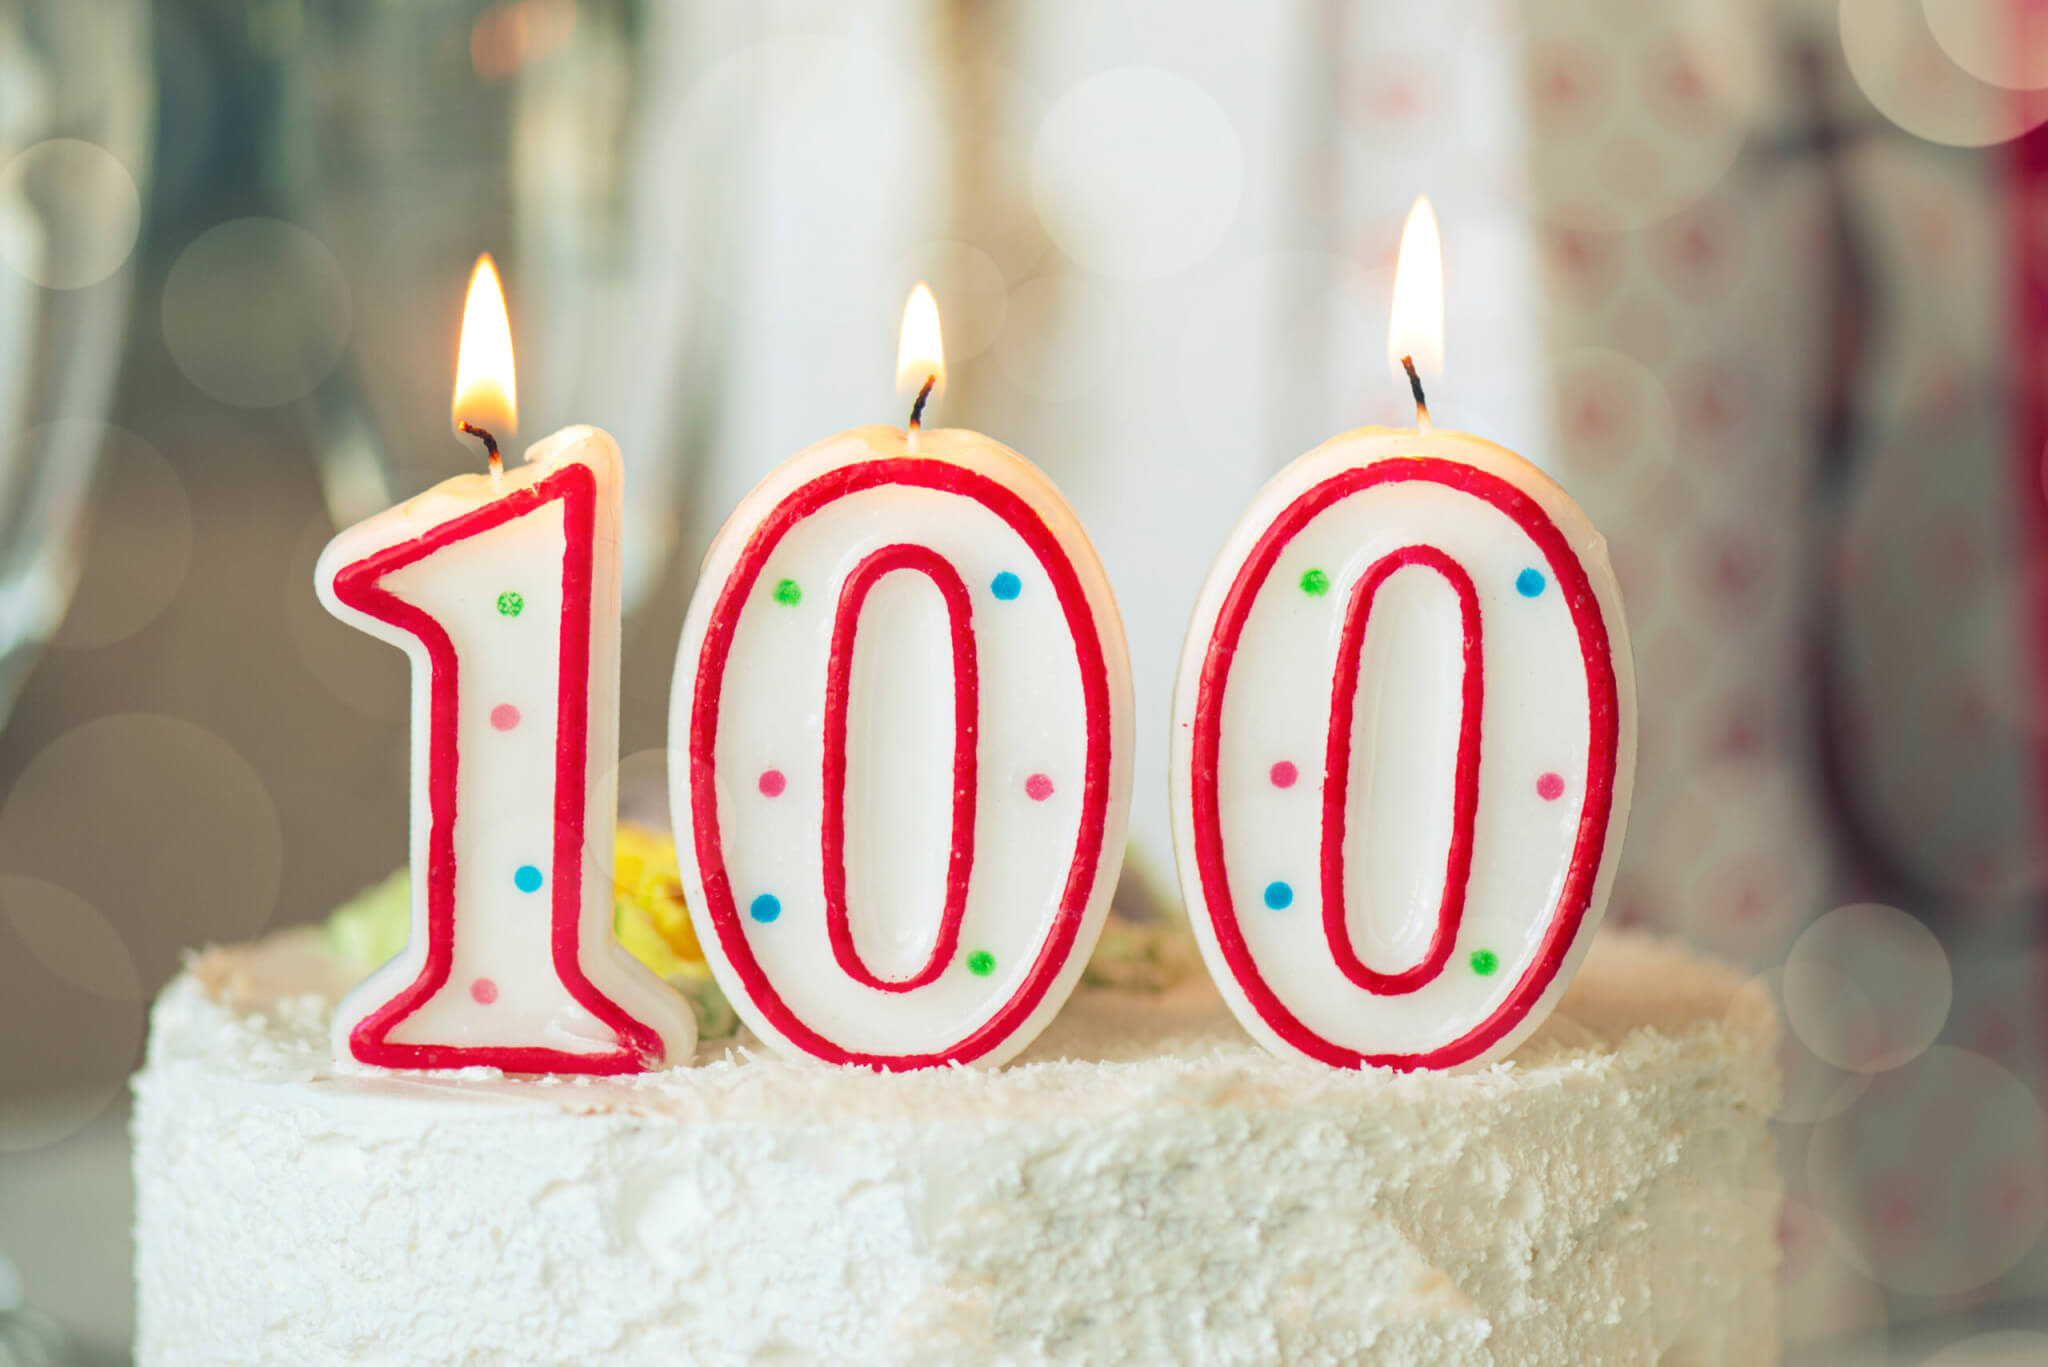 100th birthday cake and candles